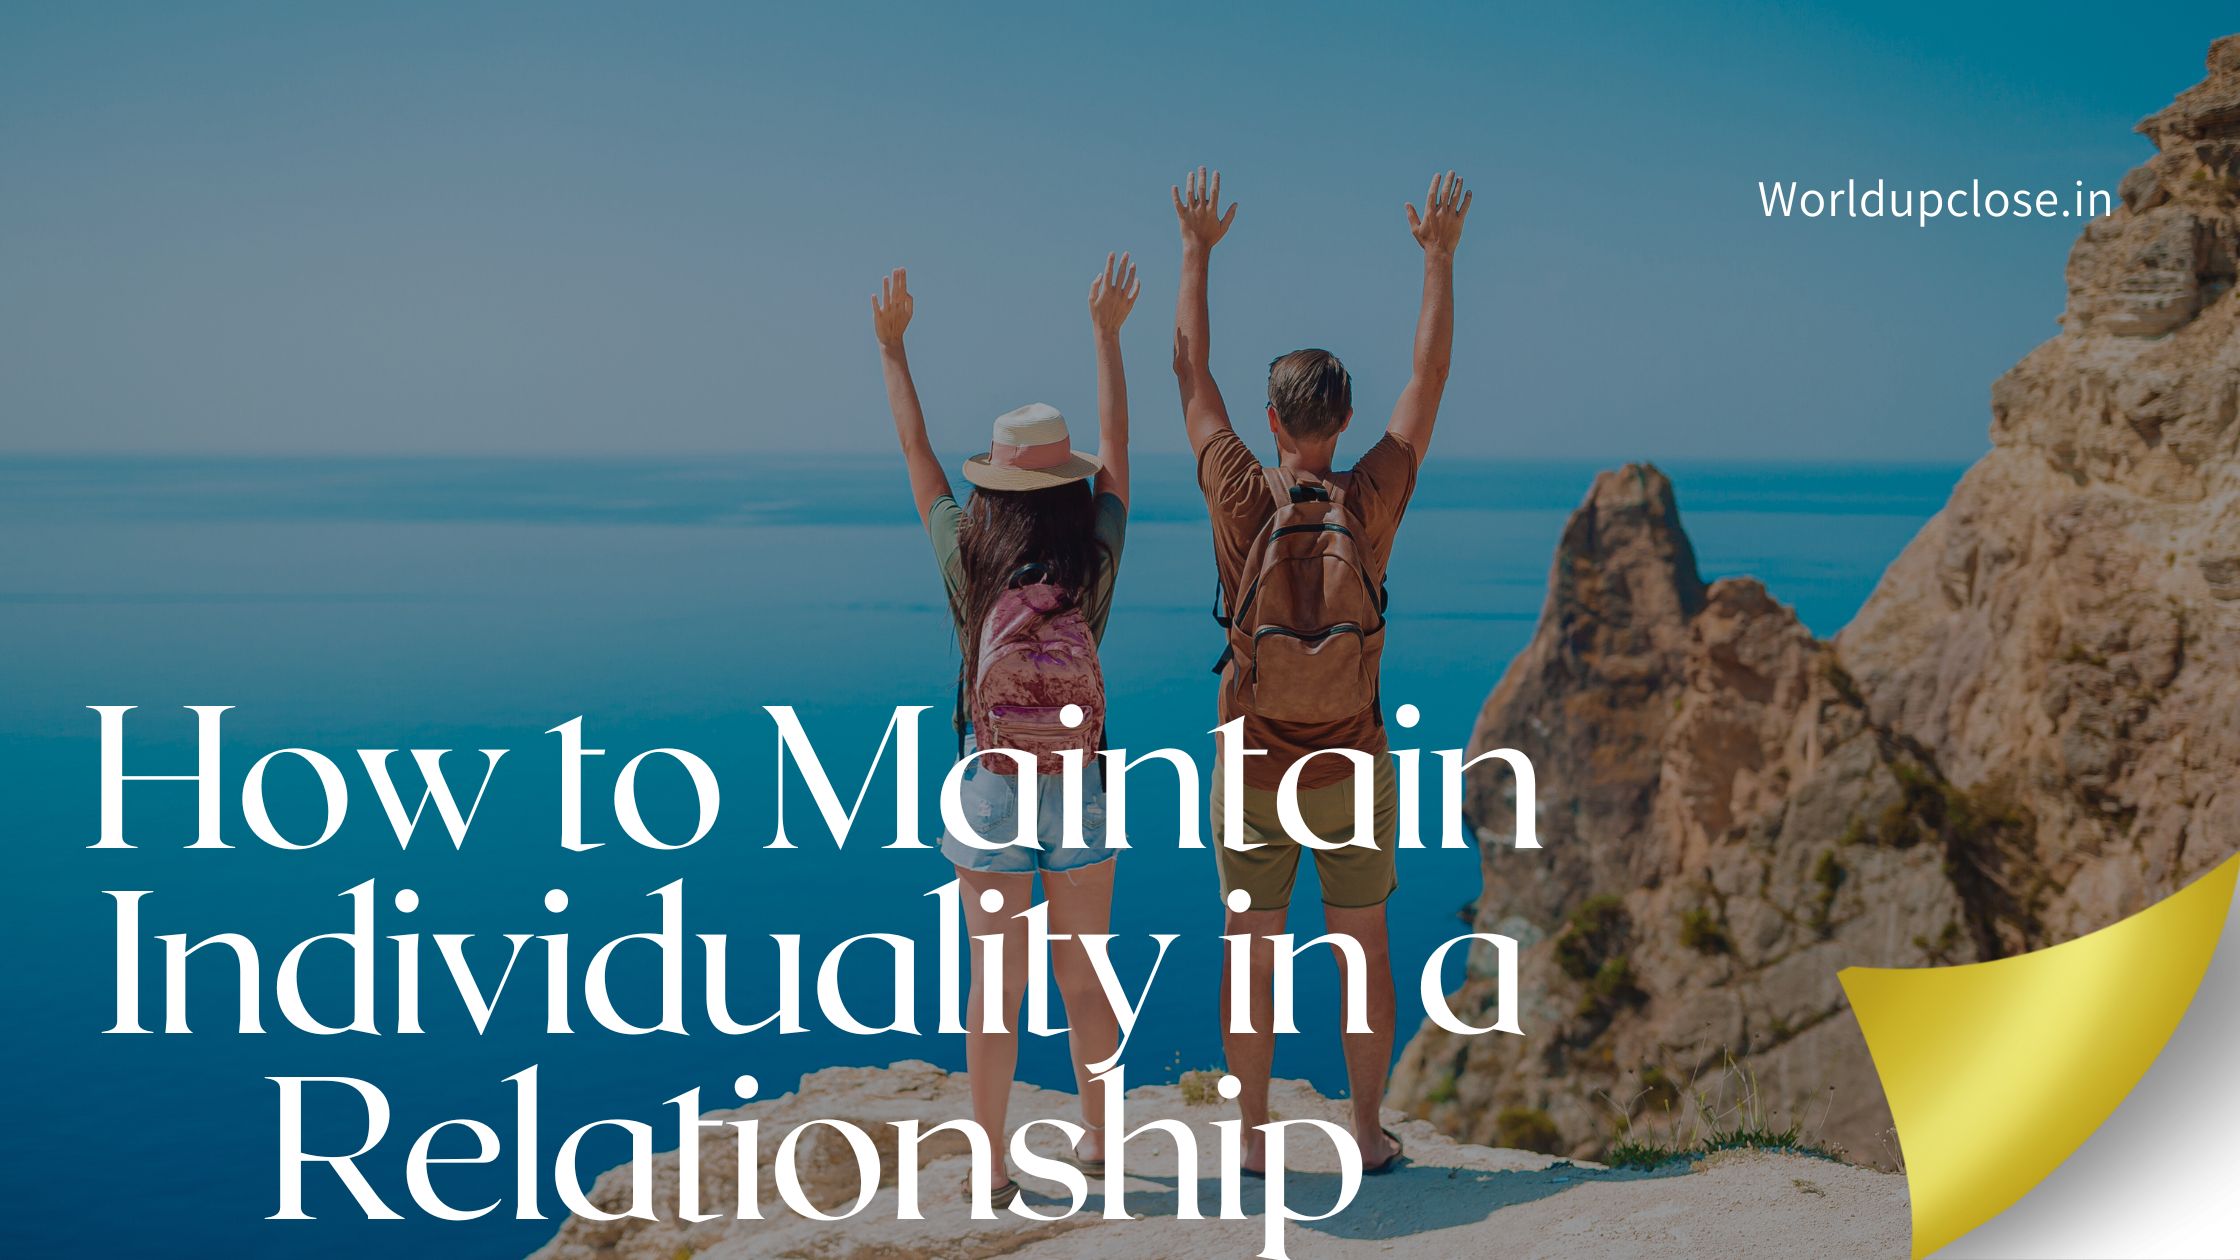 How to Maintain Individuality in a Relationship - 12 Successful Ways 43